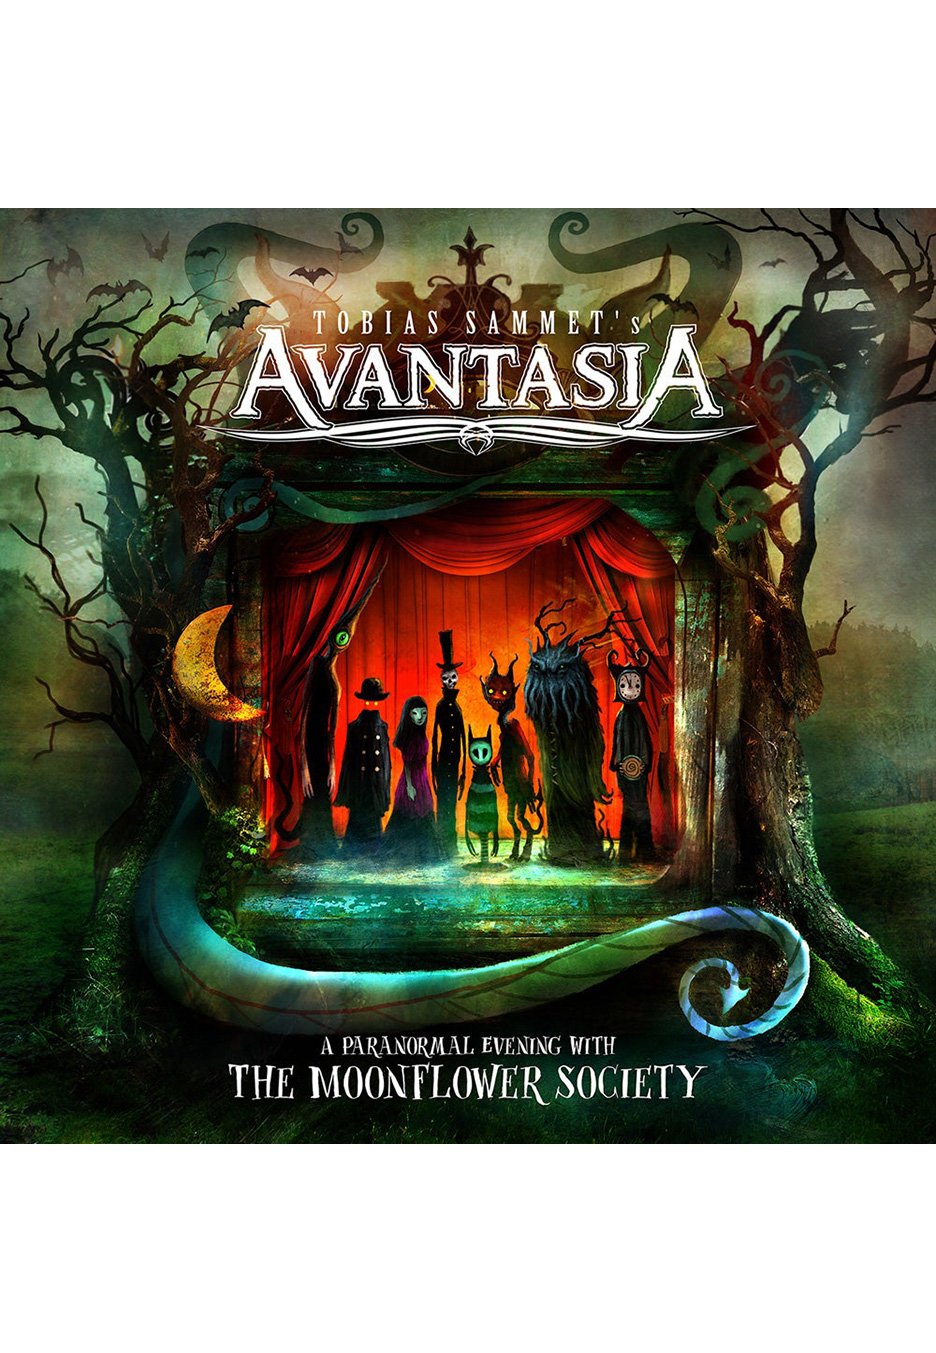 Avantasia - A Paranormal Evening With The Moonflower Society Ltd. Green - Colored 2 Vinyl